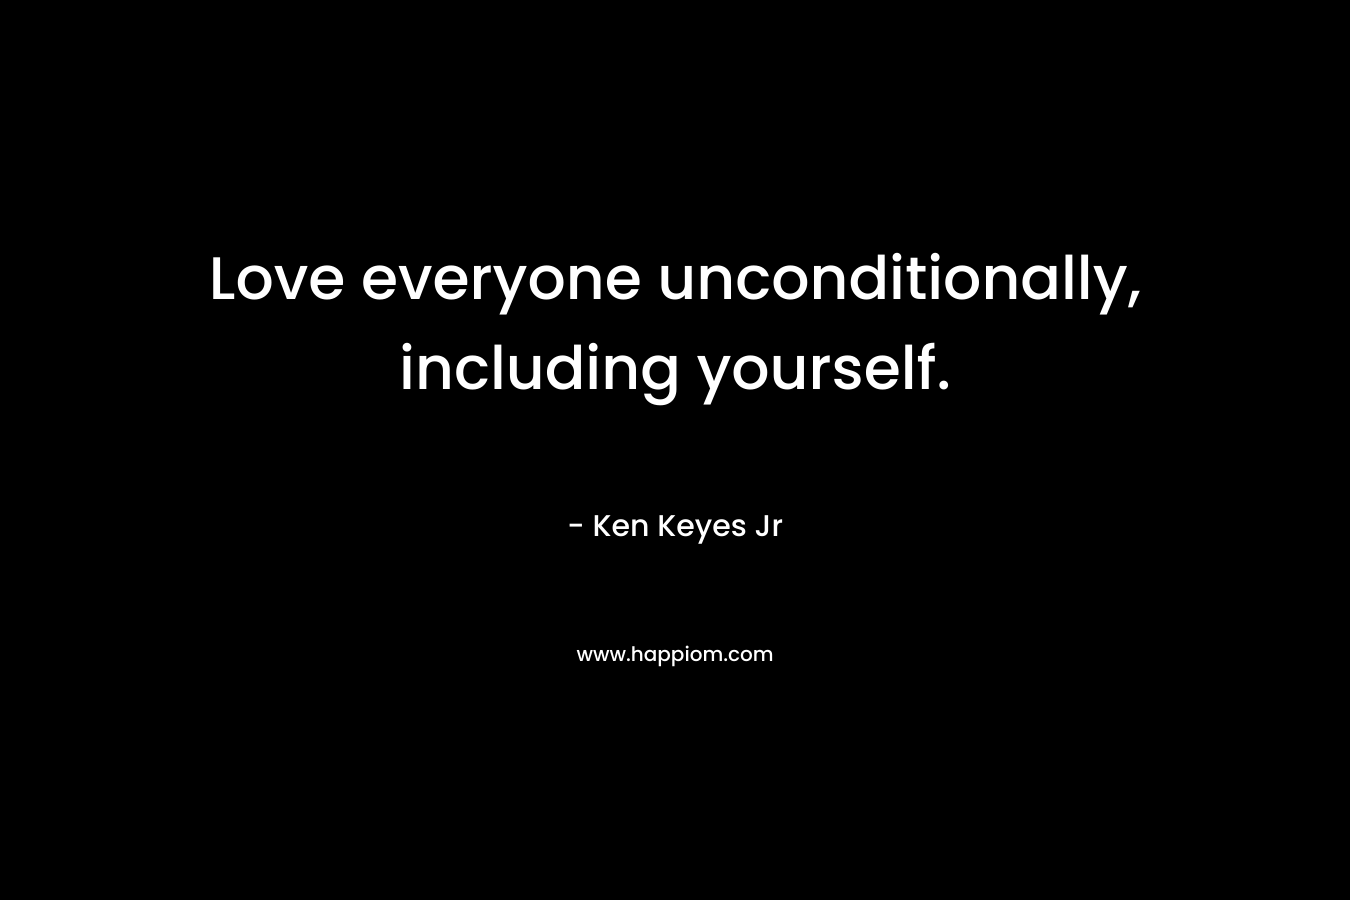 Love everyone unconditionally, including yourself.